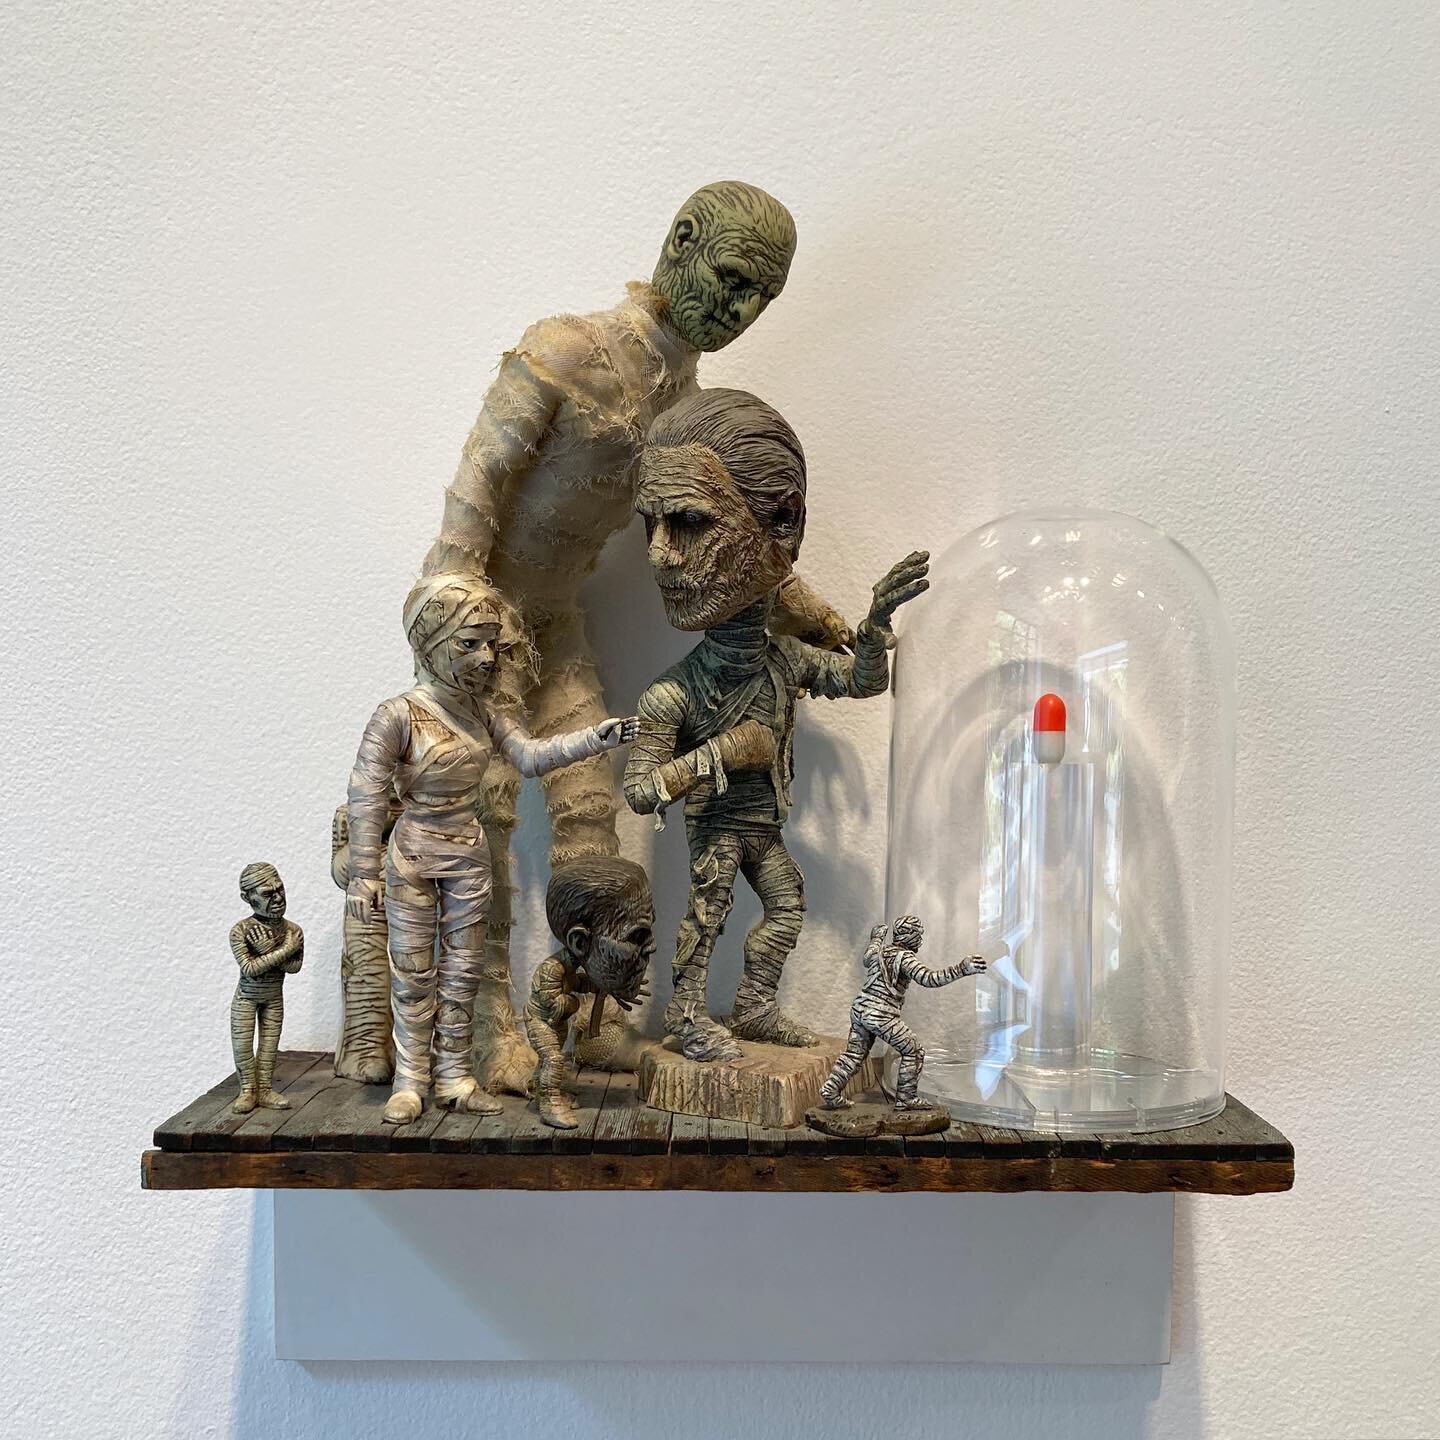 Last day: Danny McDonald, formerly of Art Club 2000, playing with his action figures @80wse.

Works shown: &quot;Restricted Access to Medical Care (The Mummies),&quot; 2007; &quot;Last Looks,&quot; 2022; &quot;Goodbye (The Wolfman and Frankenstein),&